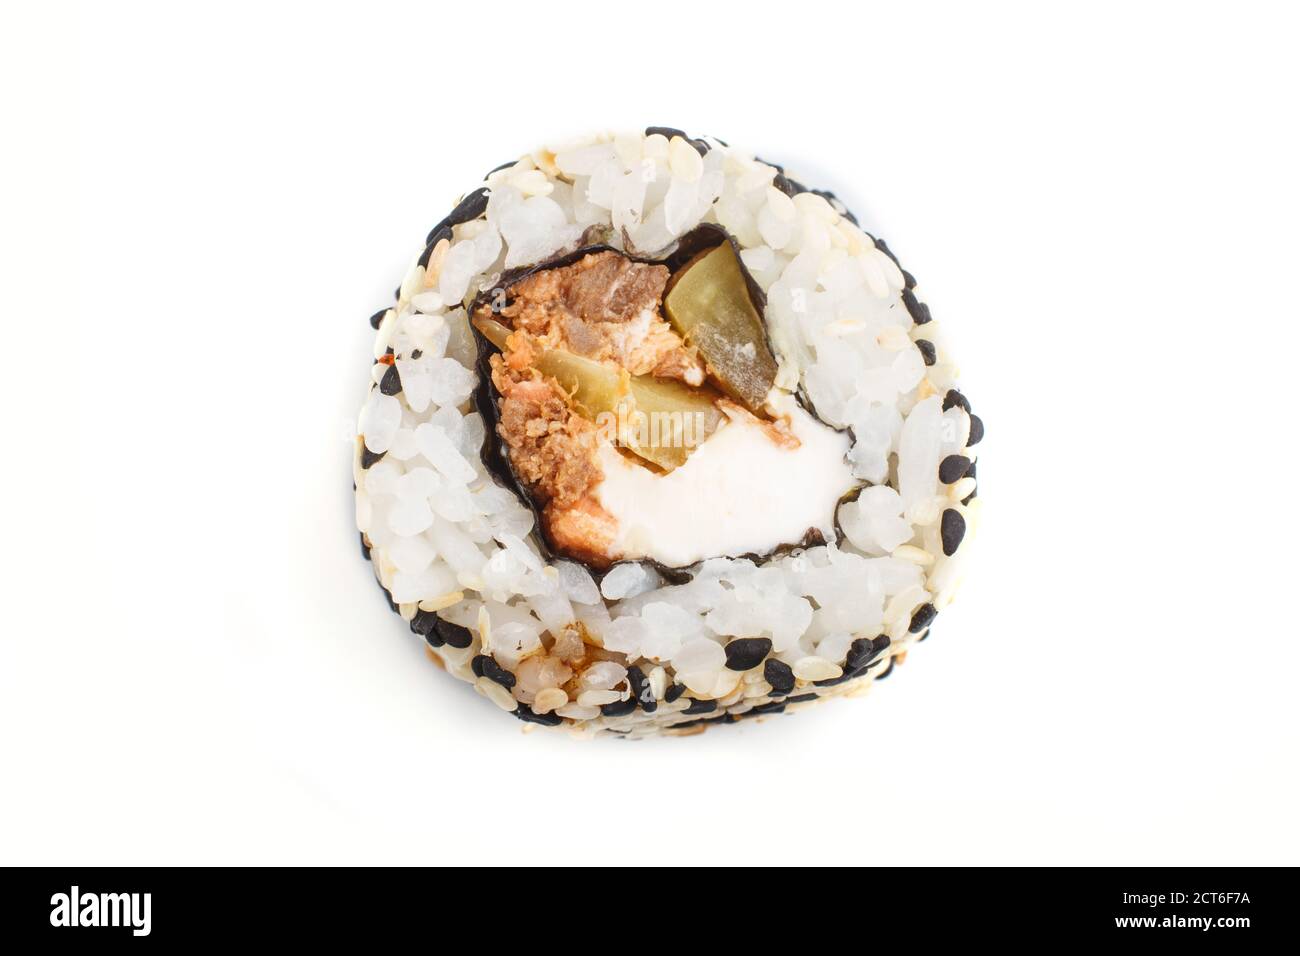 https://c8.alamy.com/comp/2CT6F7A/japanese-maki-sushi-rolls-with-salmon-sesame-cucumber-isolated-on-white-background-top-view-close-up-selective-focus-2CT6F7A.jpg